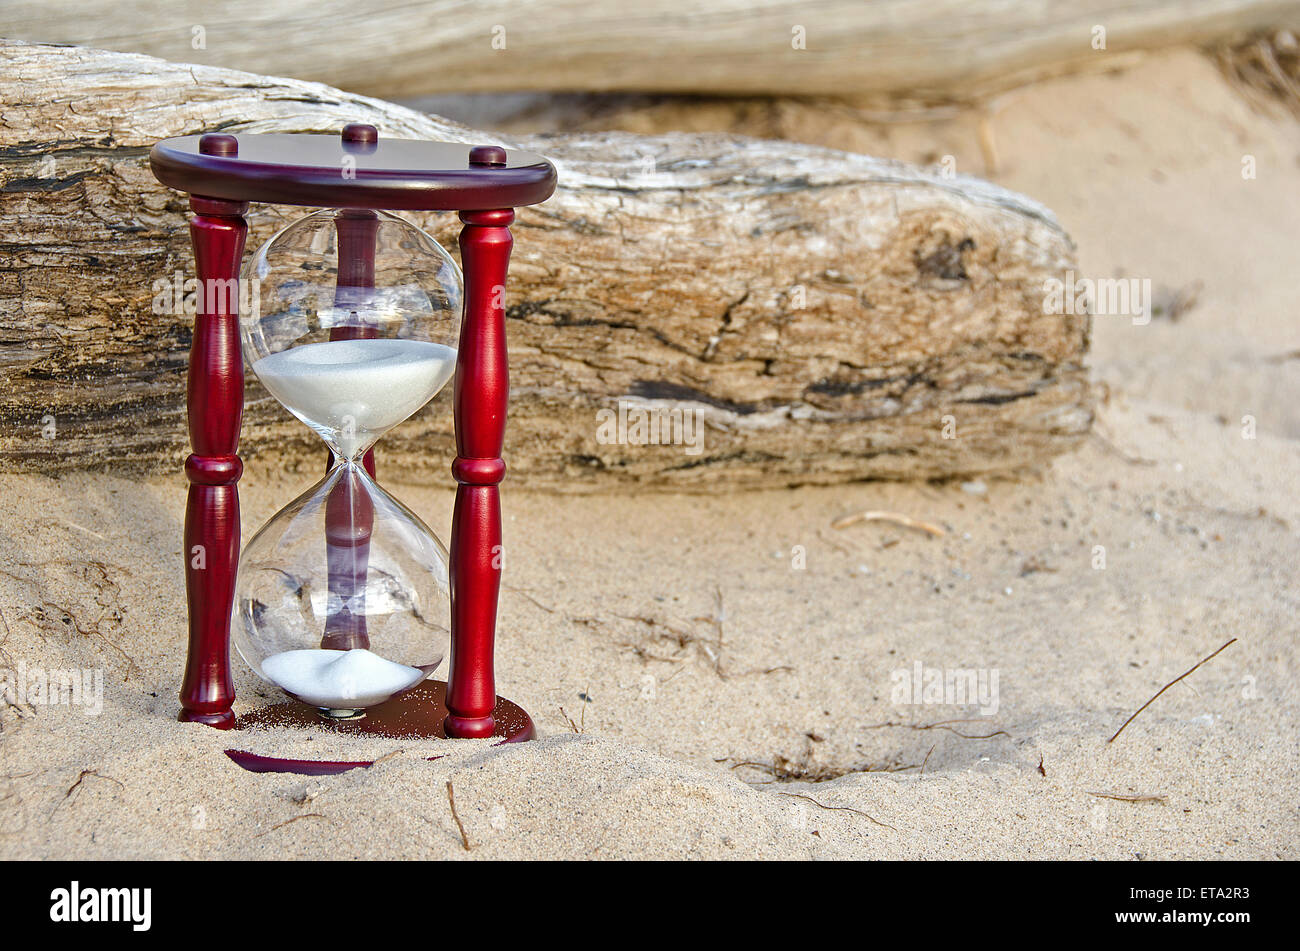 Sand timer in beach sand with driftwood log. Stock Photo